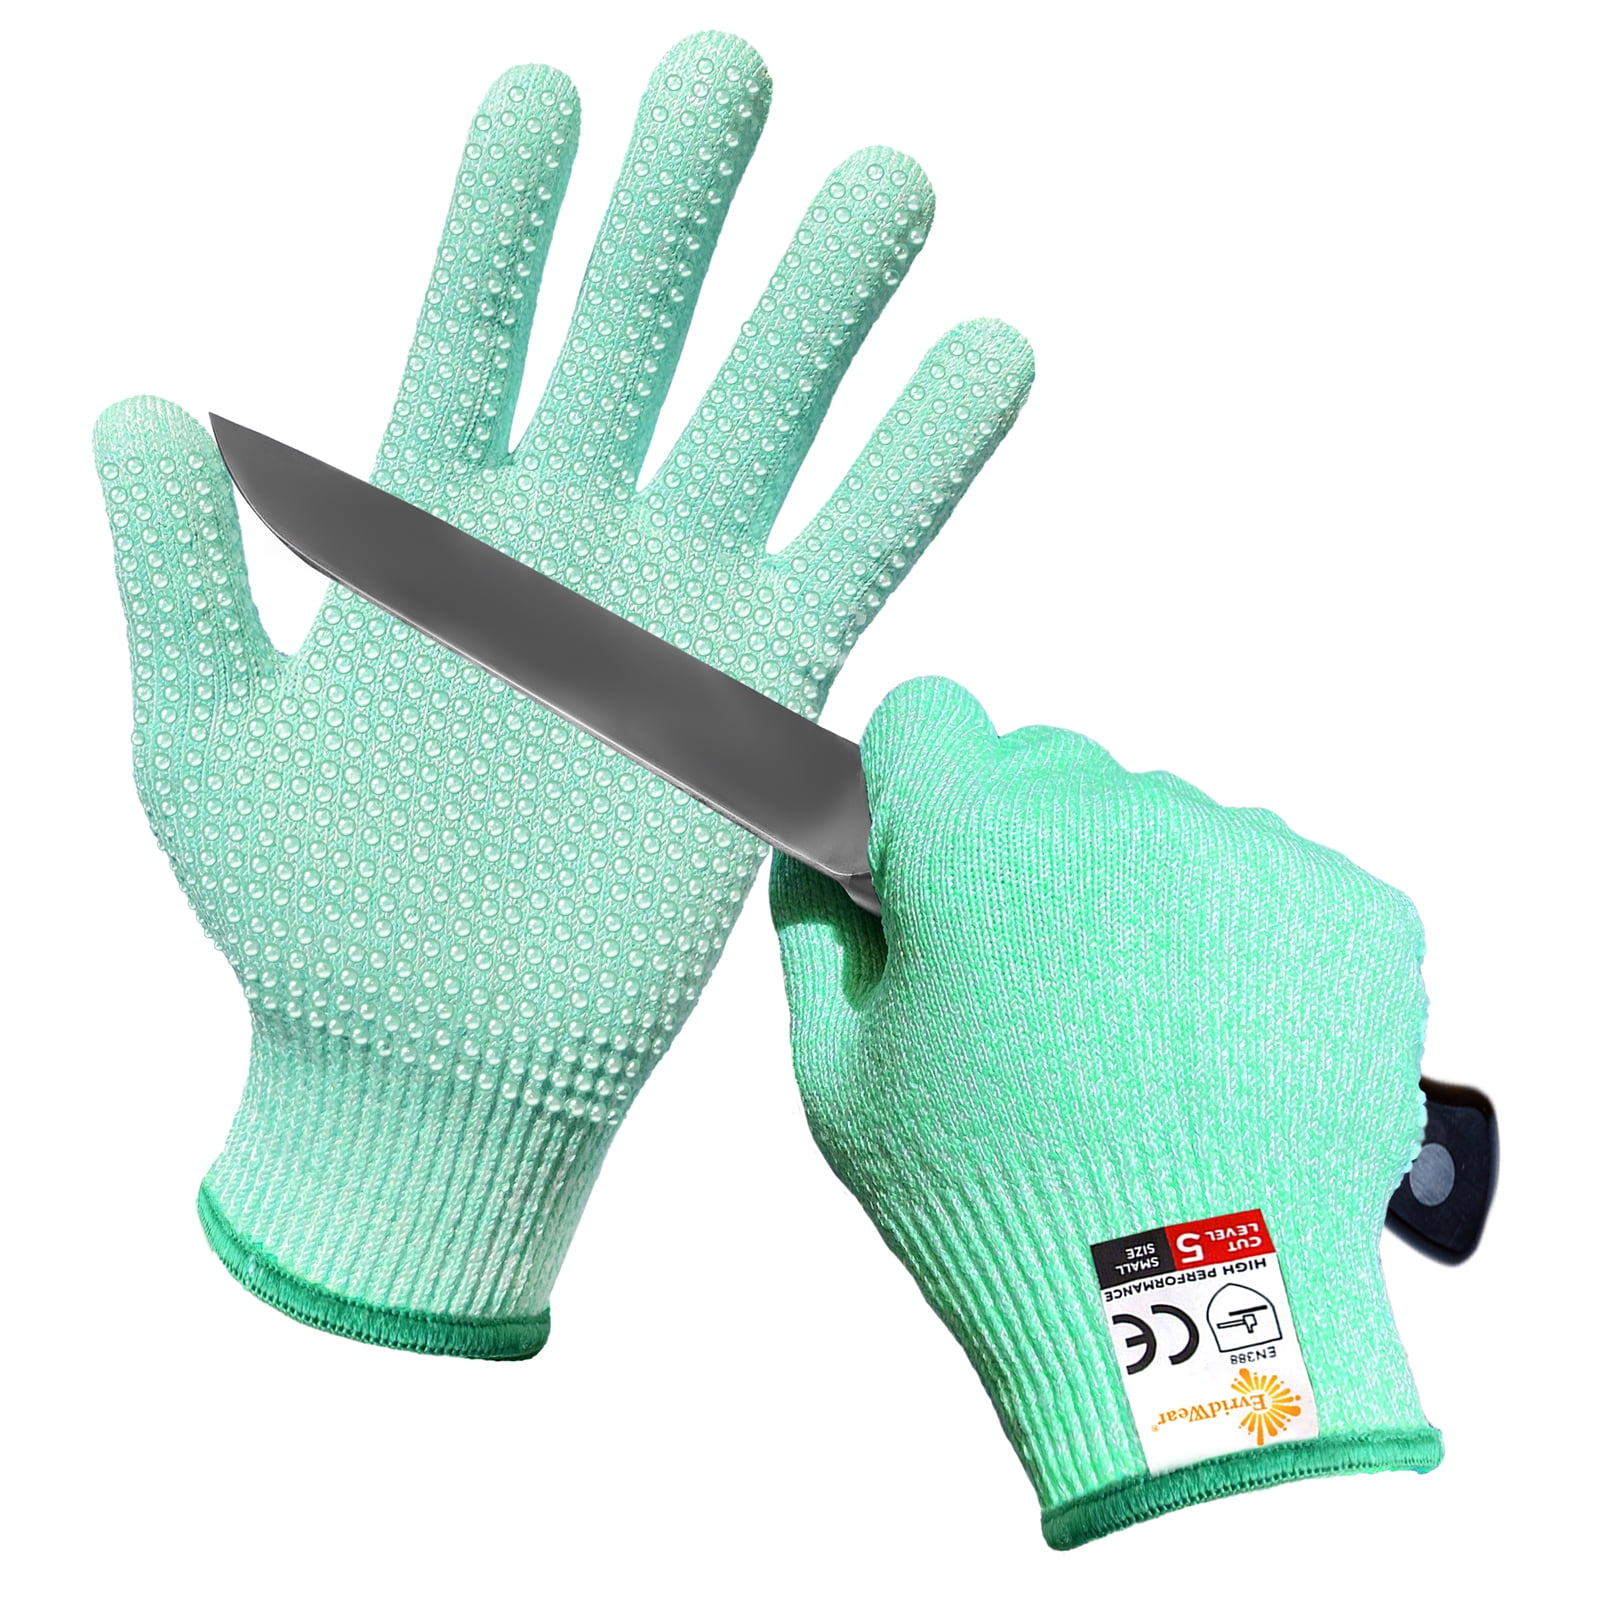 EvridWear Cut Resistant Work Gloves with Grip Dots - Level 5 Protection for  Kitchen and Construction, 1 Pair, Medium, Green 